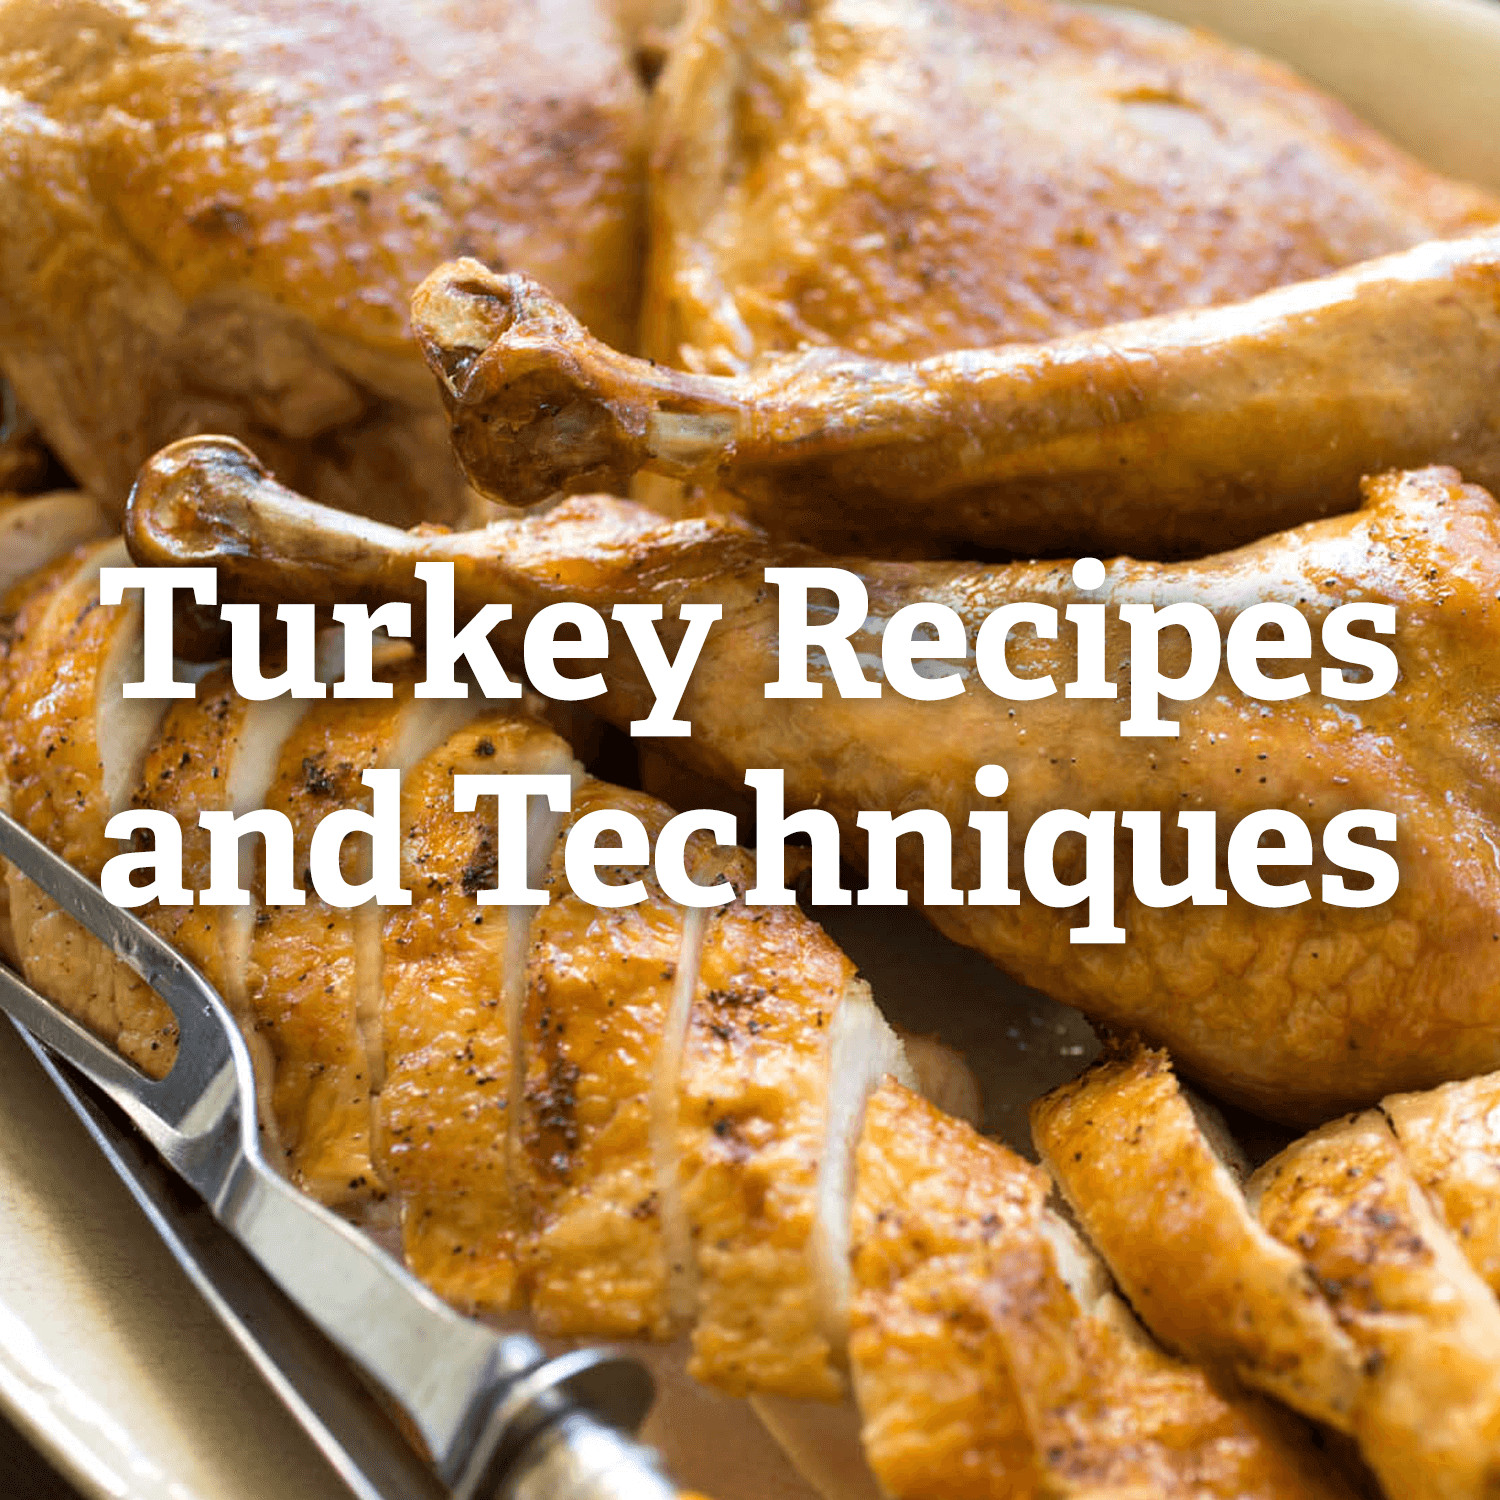 The Best Turkey Recipes For Thanksgiving
 Thanksgiving Turkey Recipes and Techniques